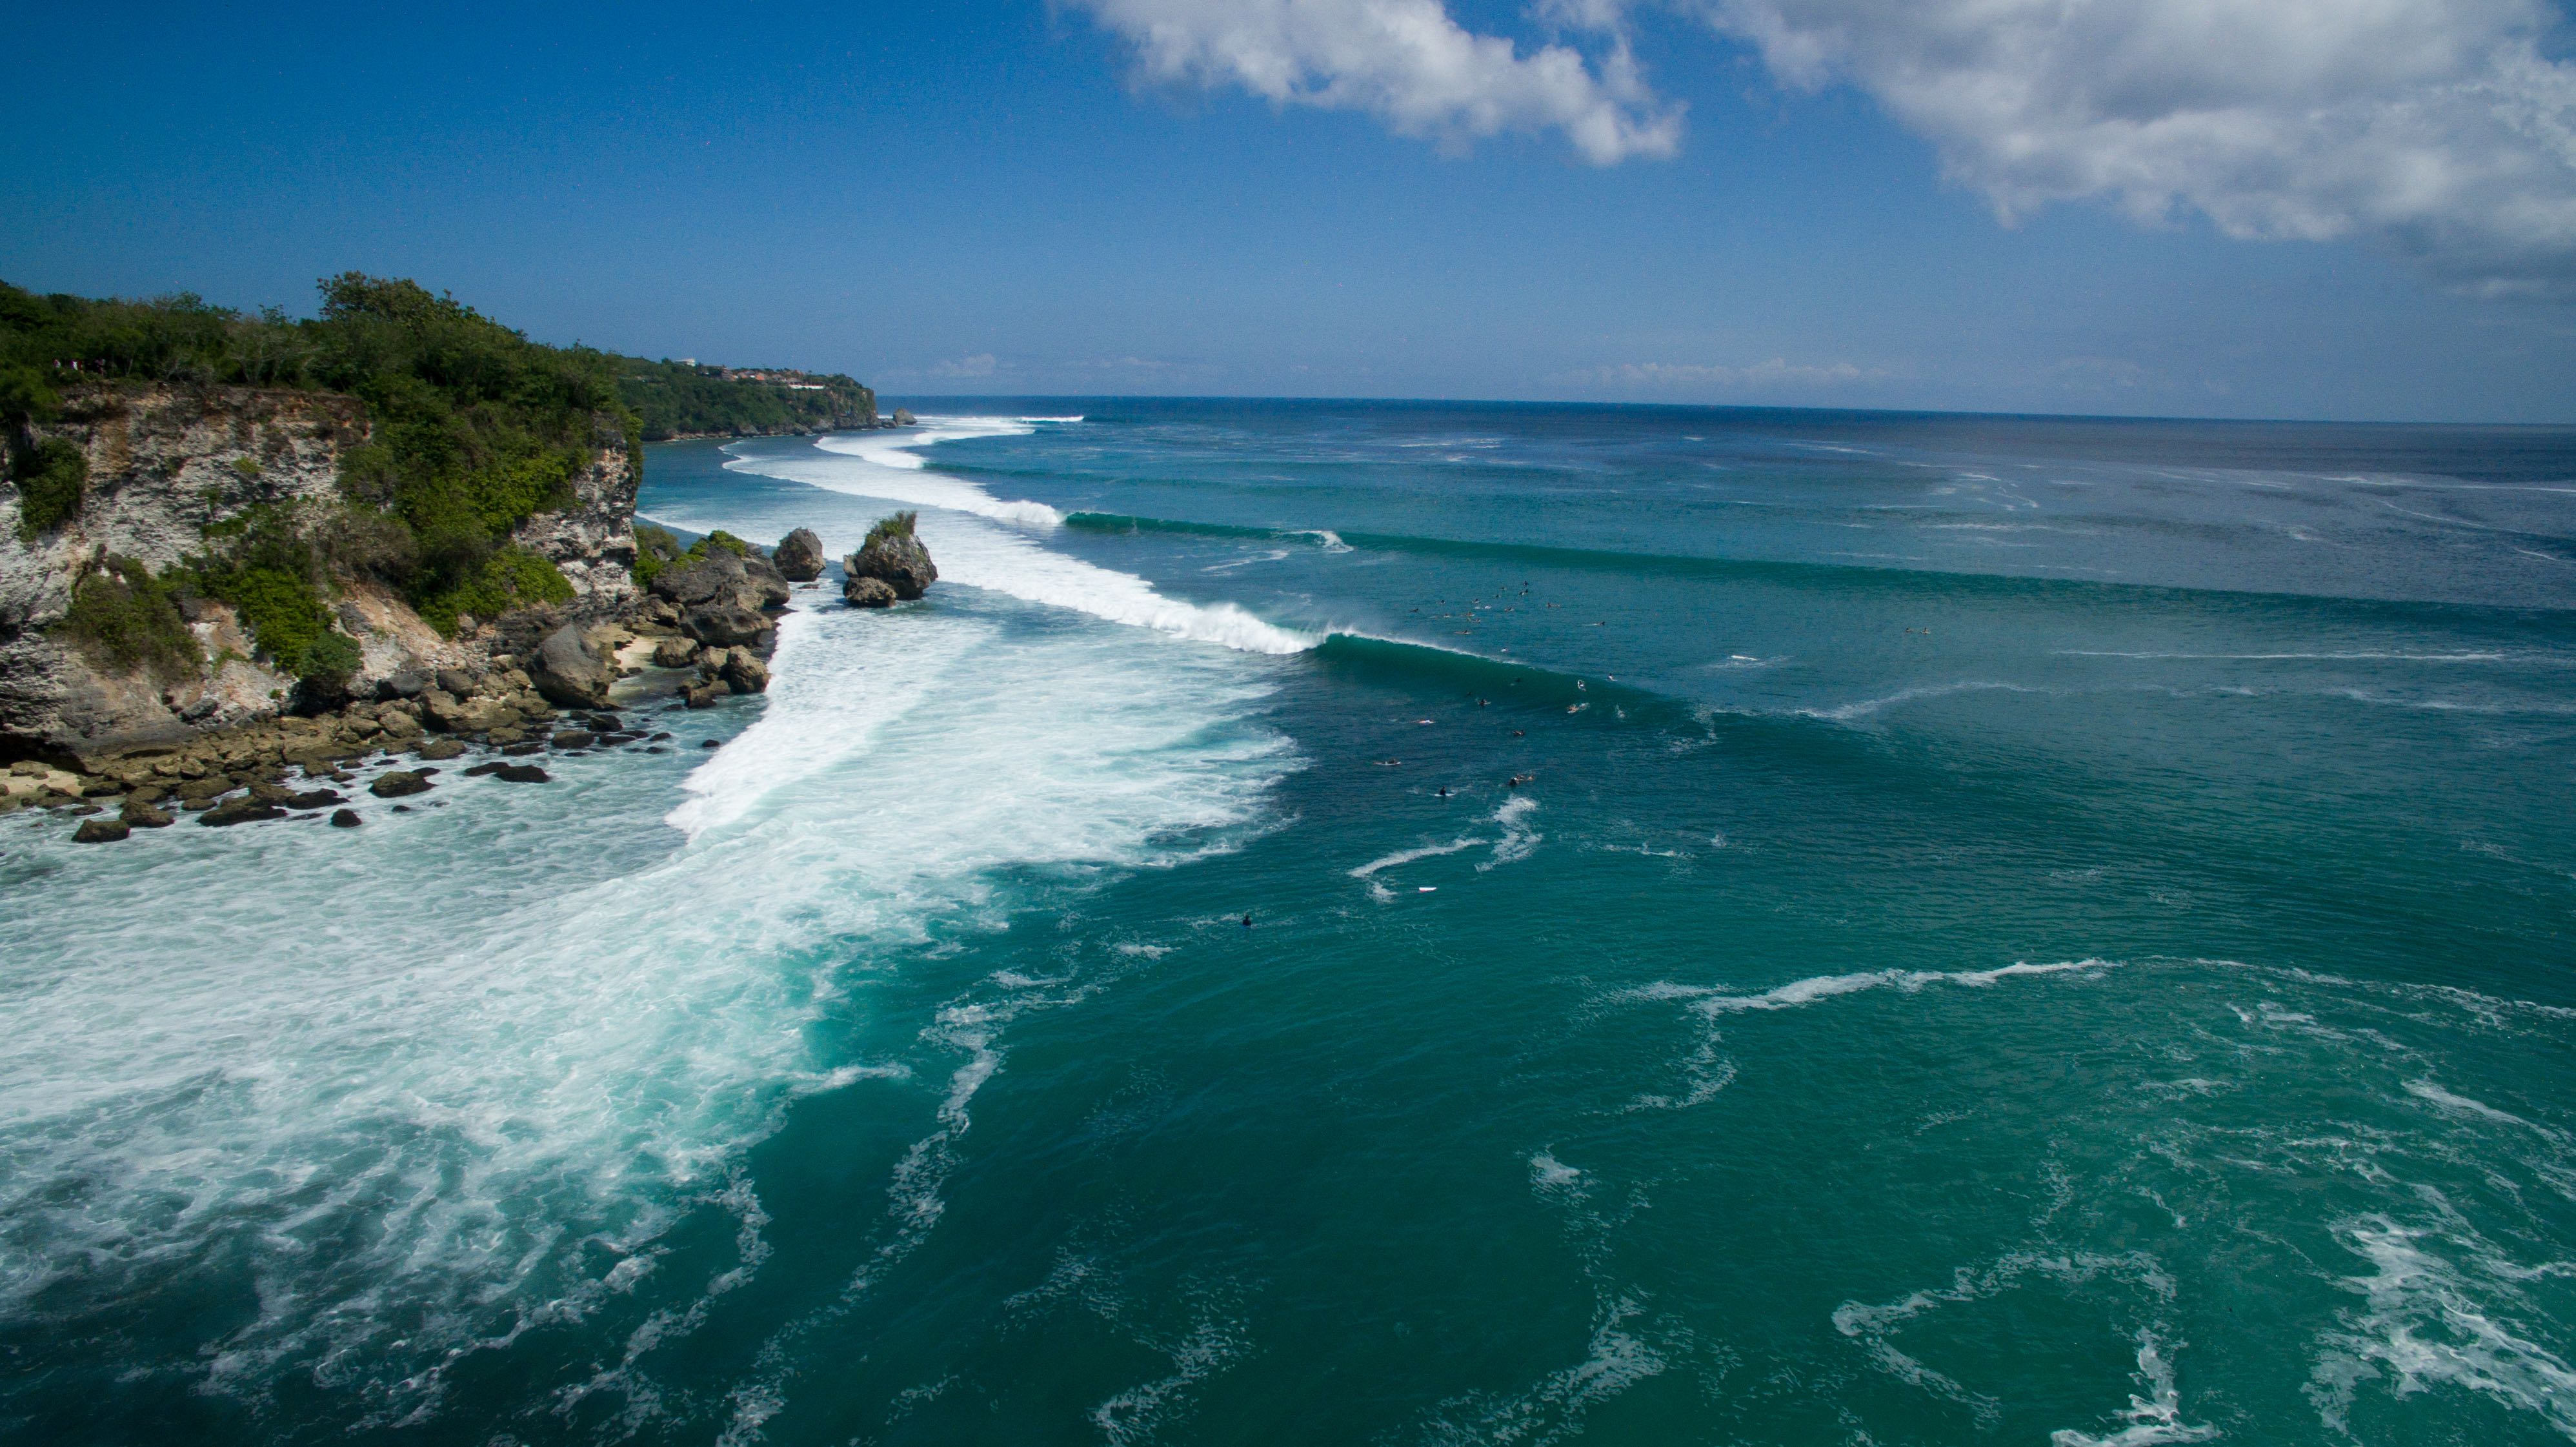 Photo courtesy of Rip Curl Asia